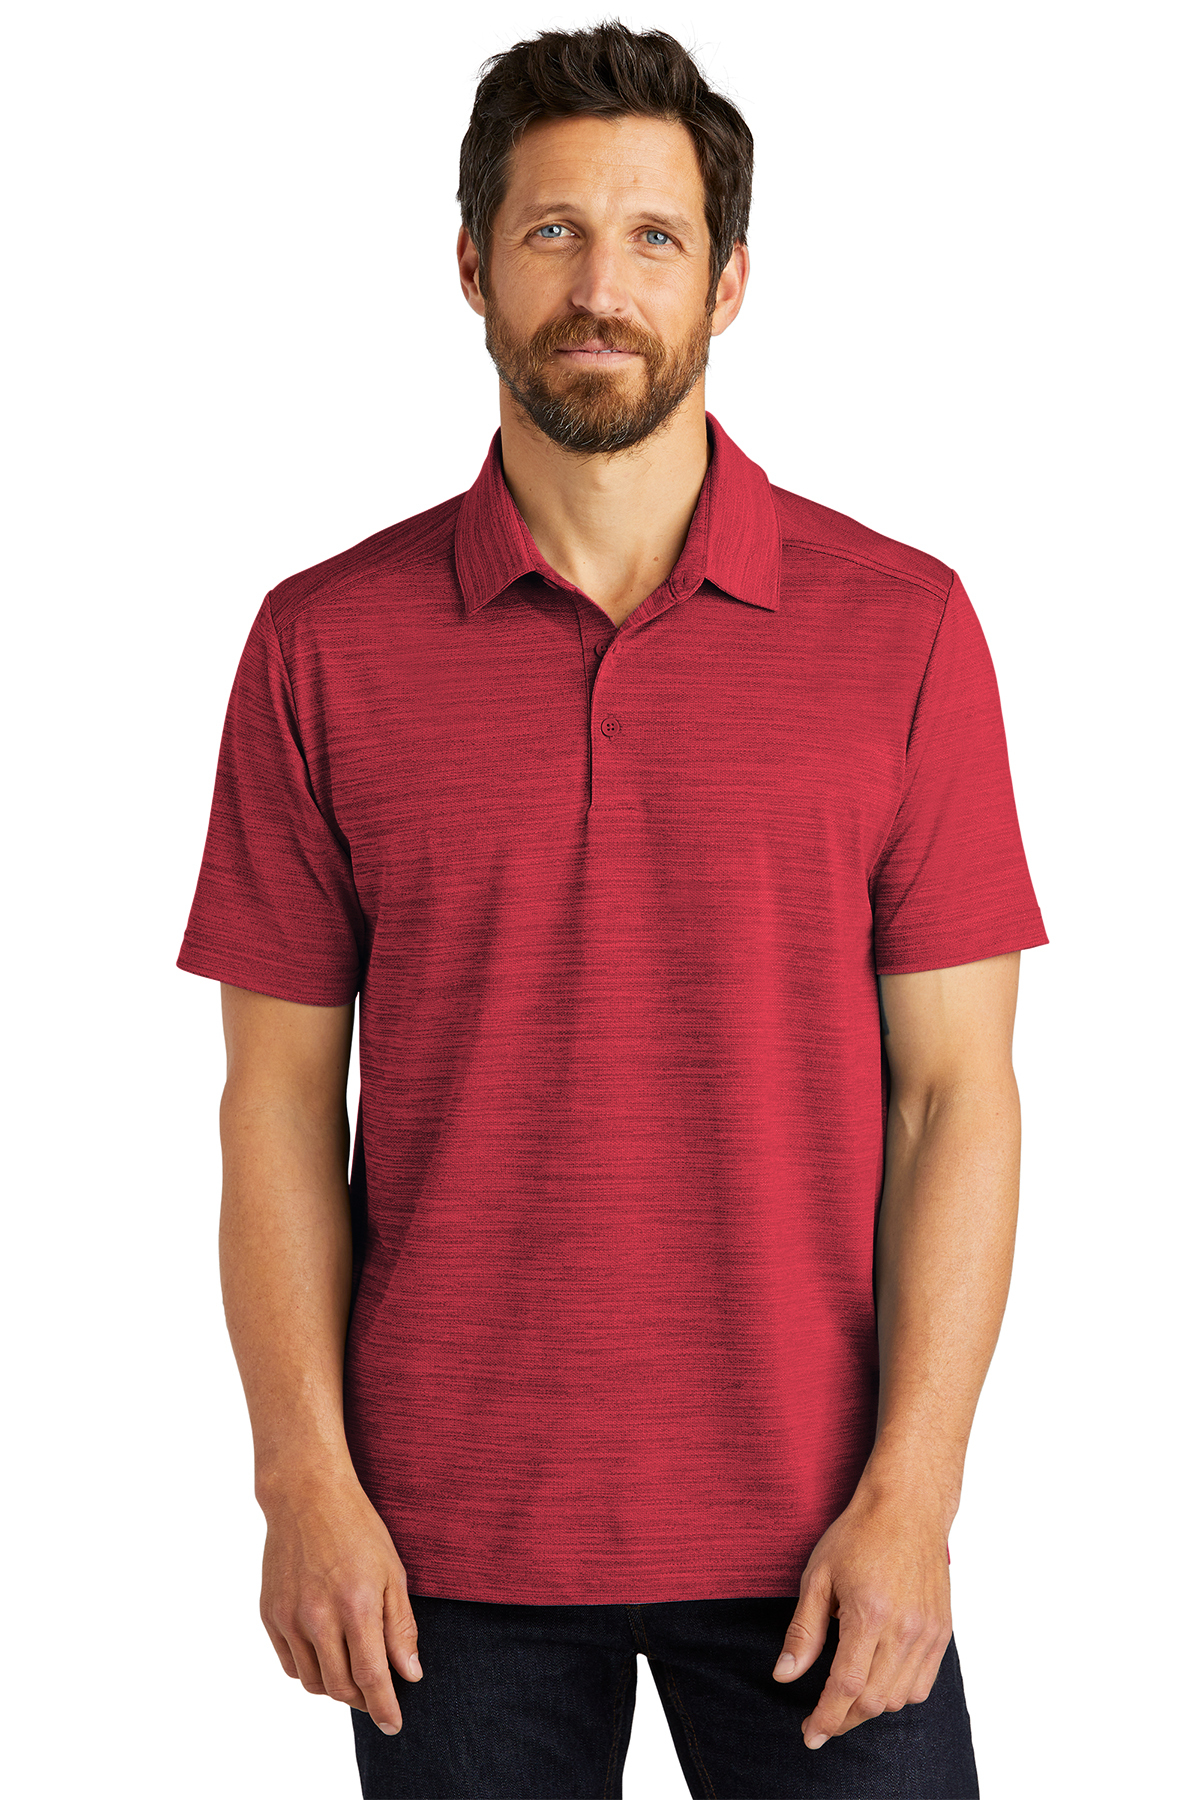 Product Stretch | Port Authority Heather | Polo Port Authority